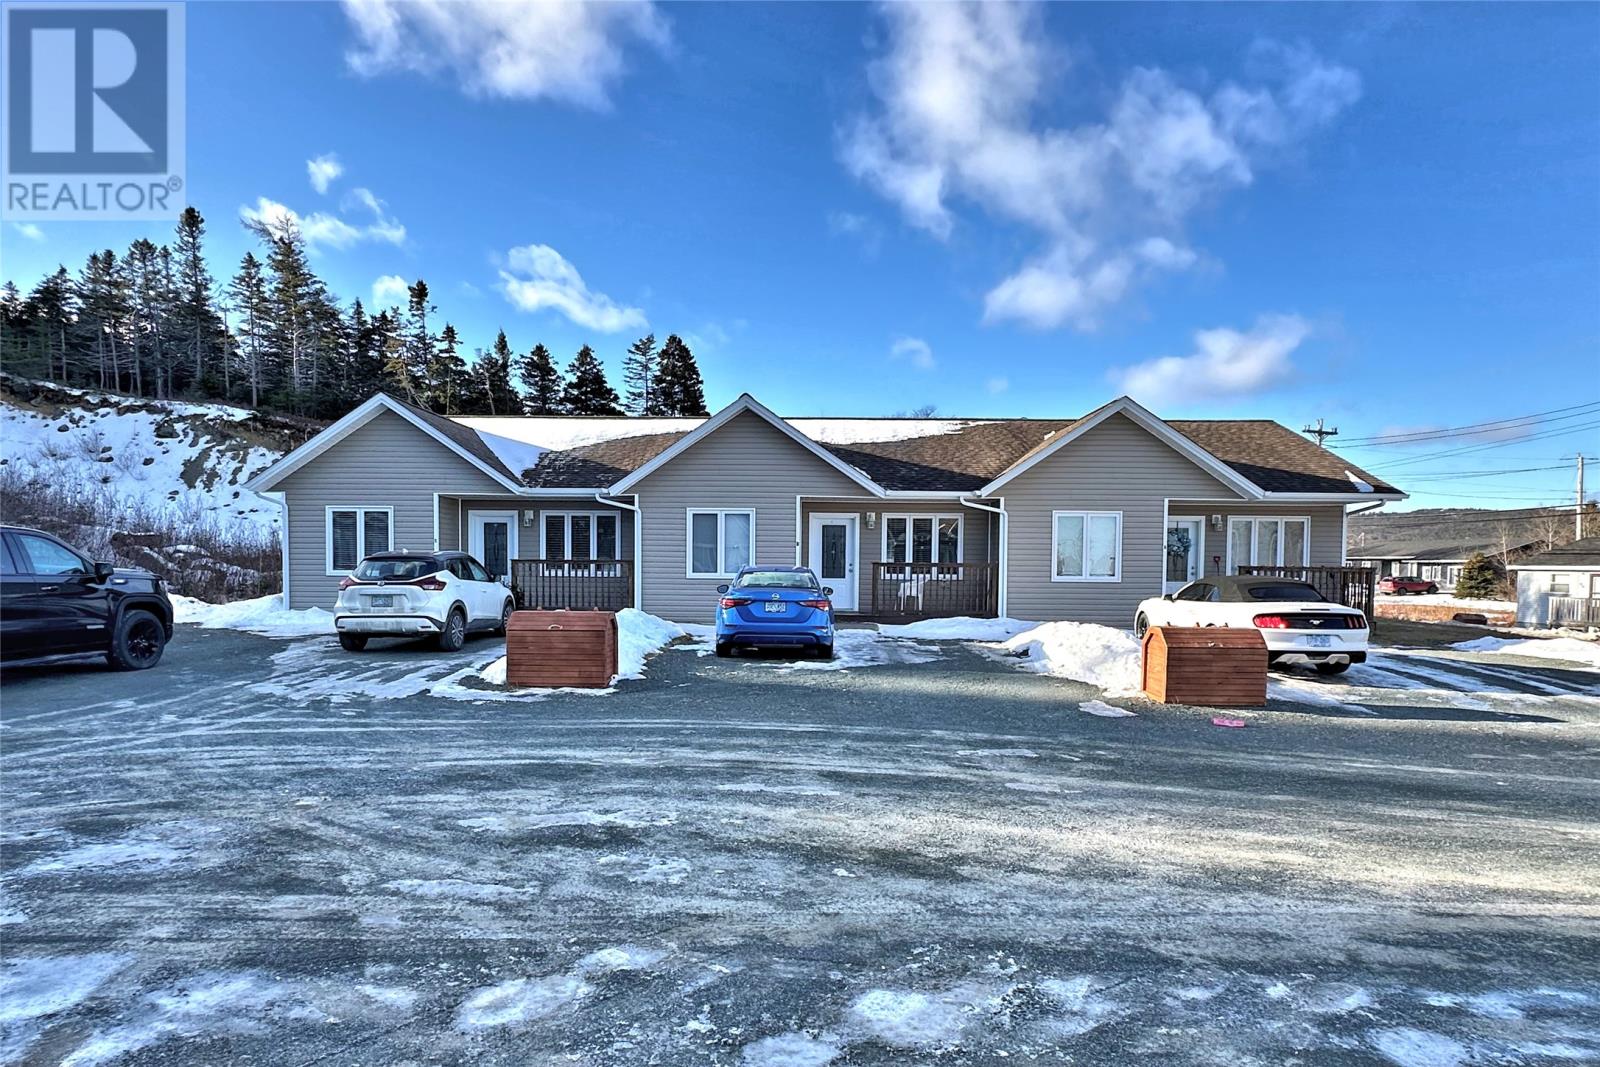 75 Shearstown Road, Bay Roberts, A0A1G0, ,Single Family,For sale,Shearstown,1267099